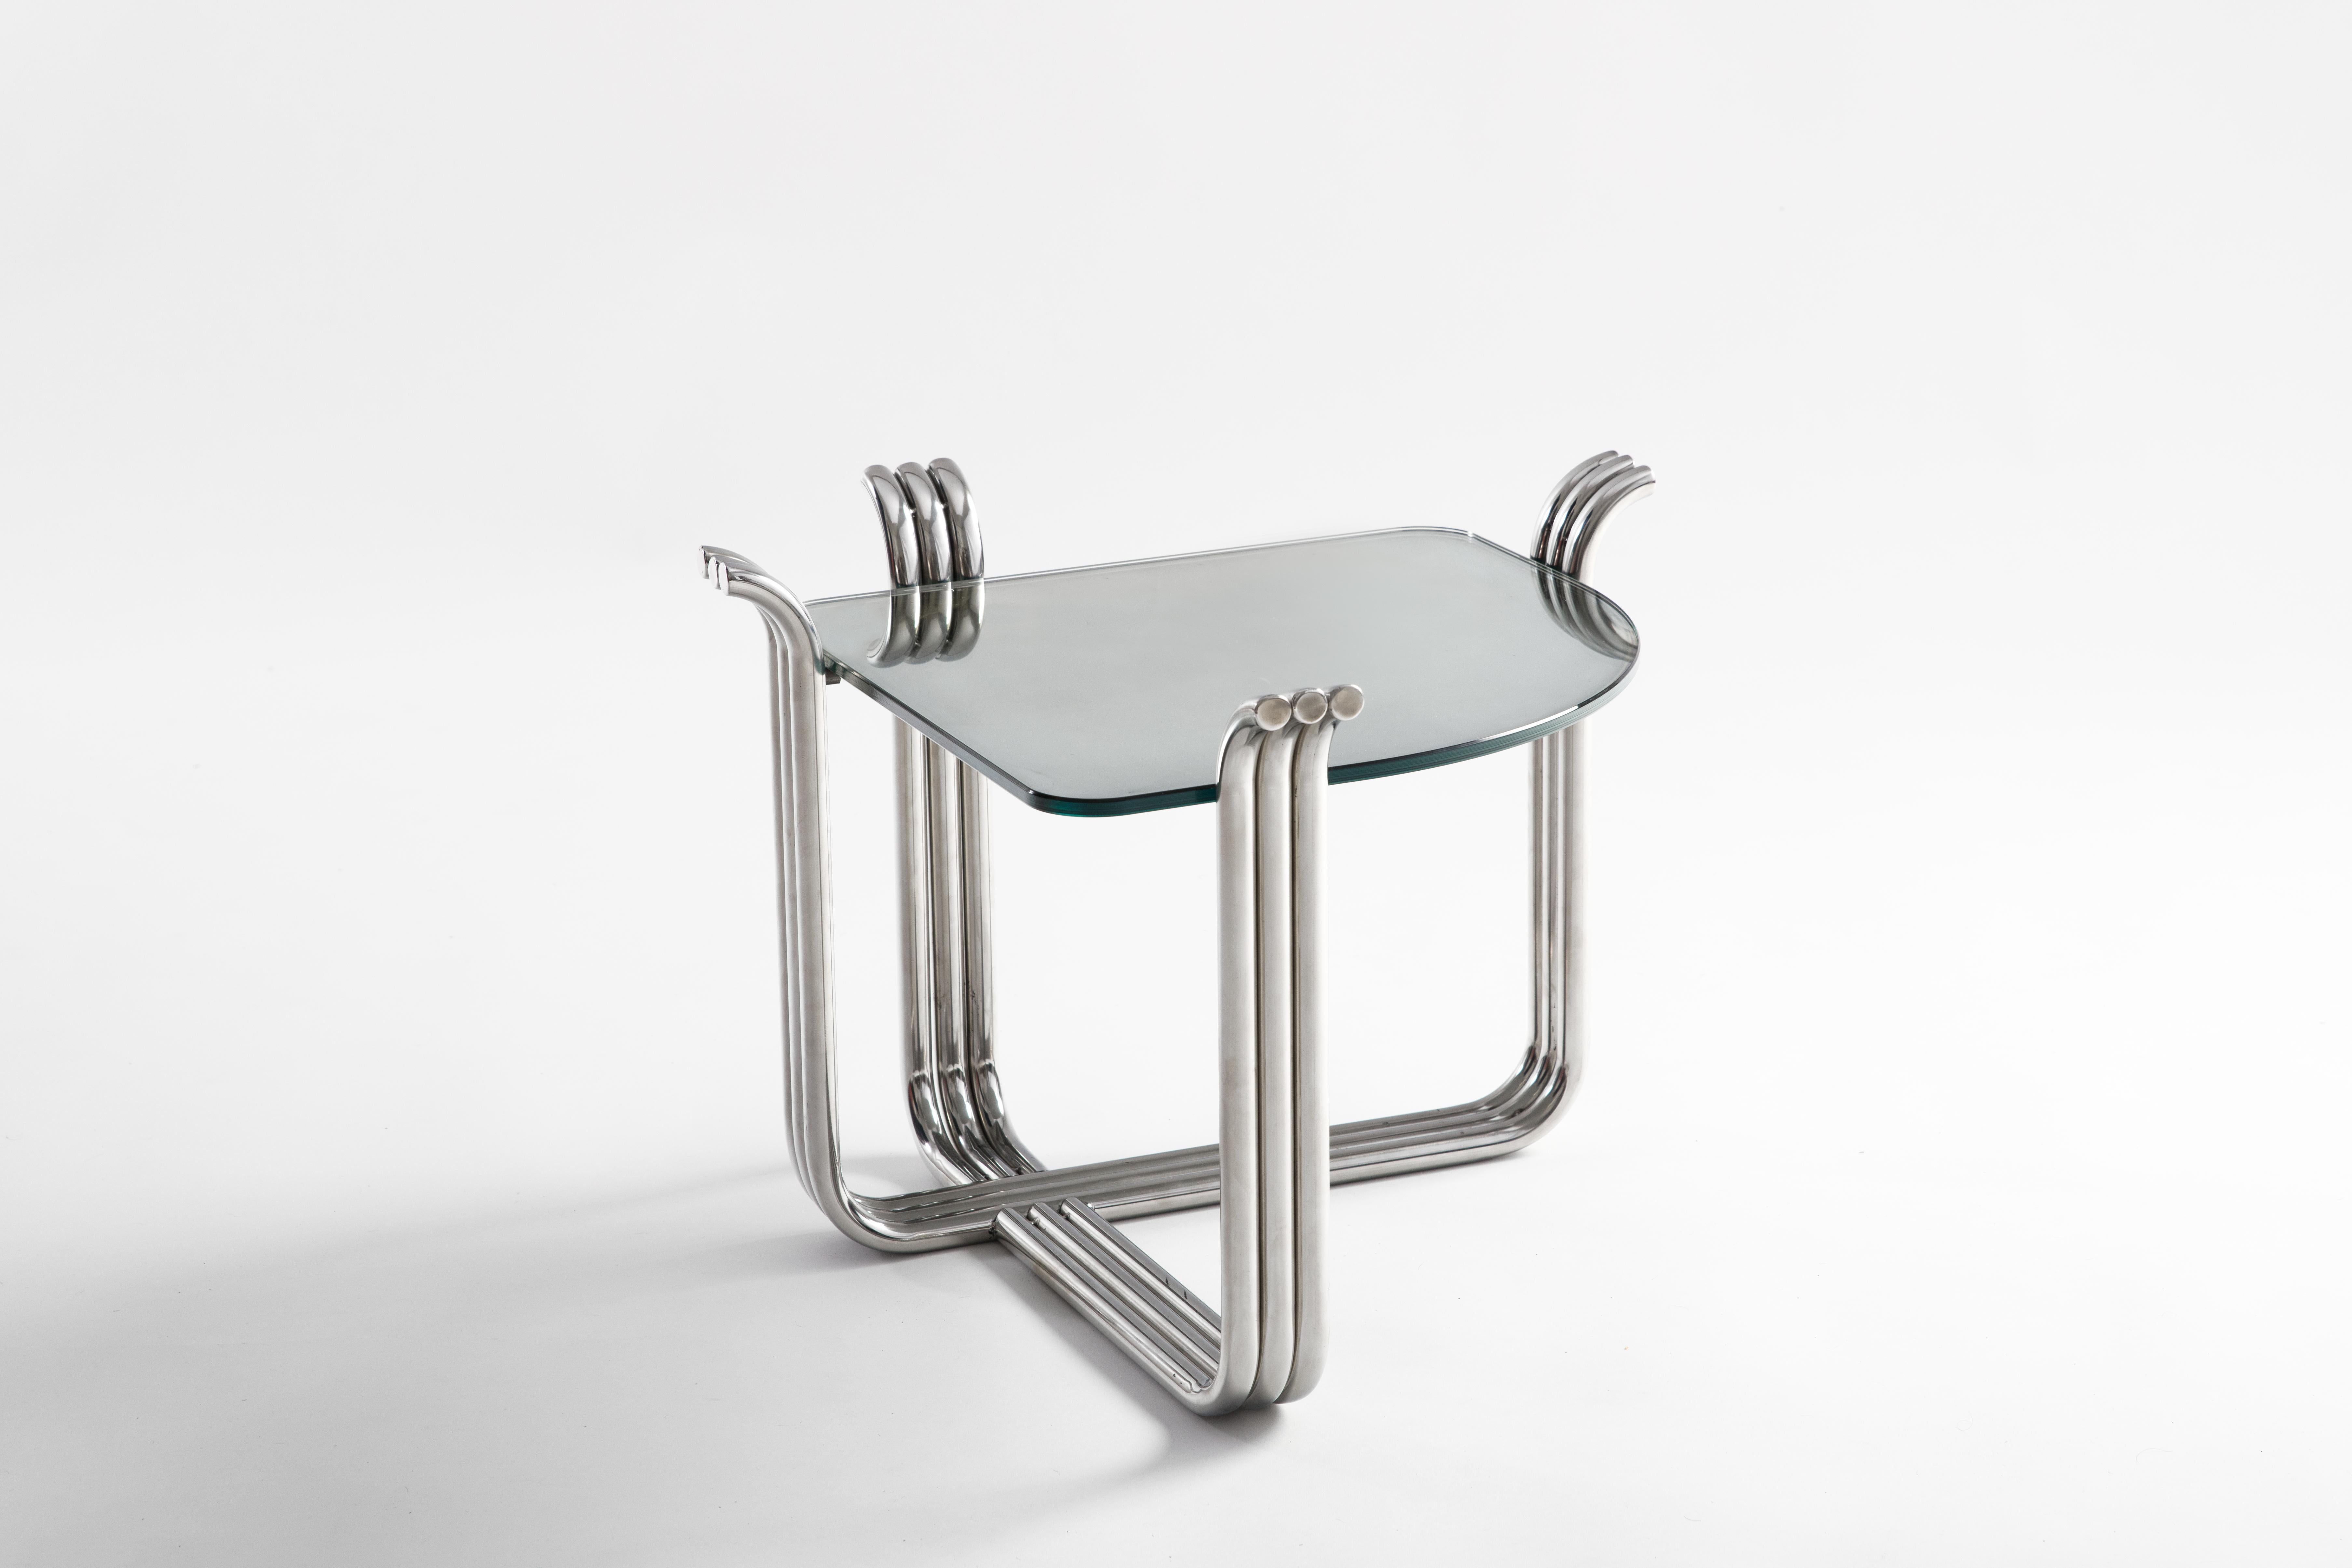 Traspade side table by Testatonda
Dimensions: D 55 x W 55 x H 42 cm.
Materials: stainless steel, glass.

The Trespade collection is the repetition of dimensions, the intertwining of materials, colors and reflections: our way of interpreting the